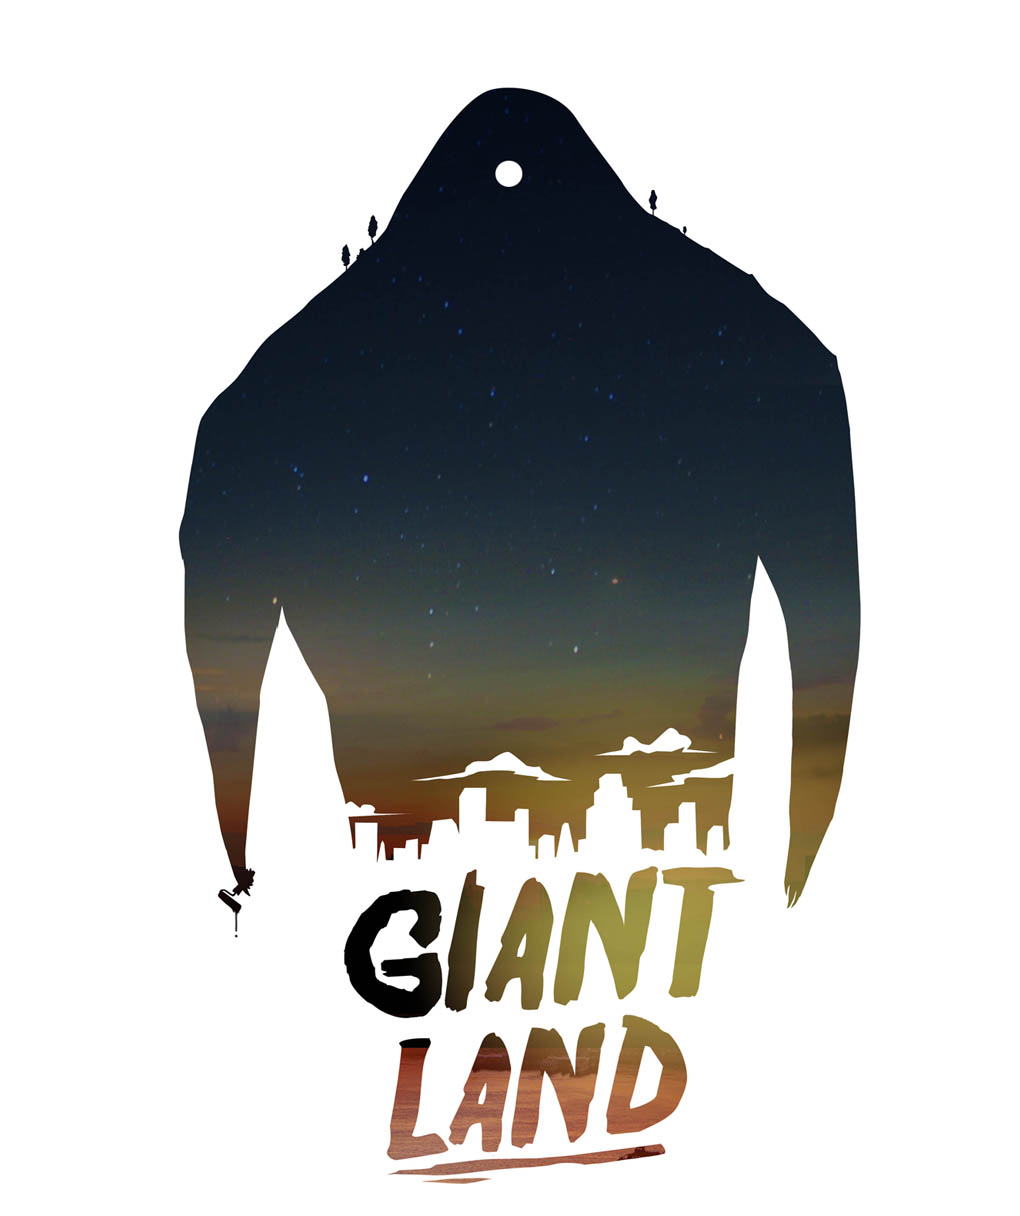 Welcome to Giant Land